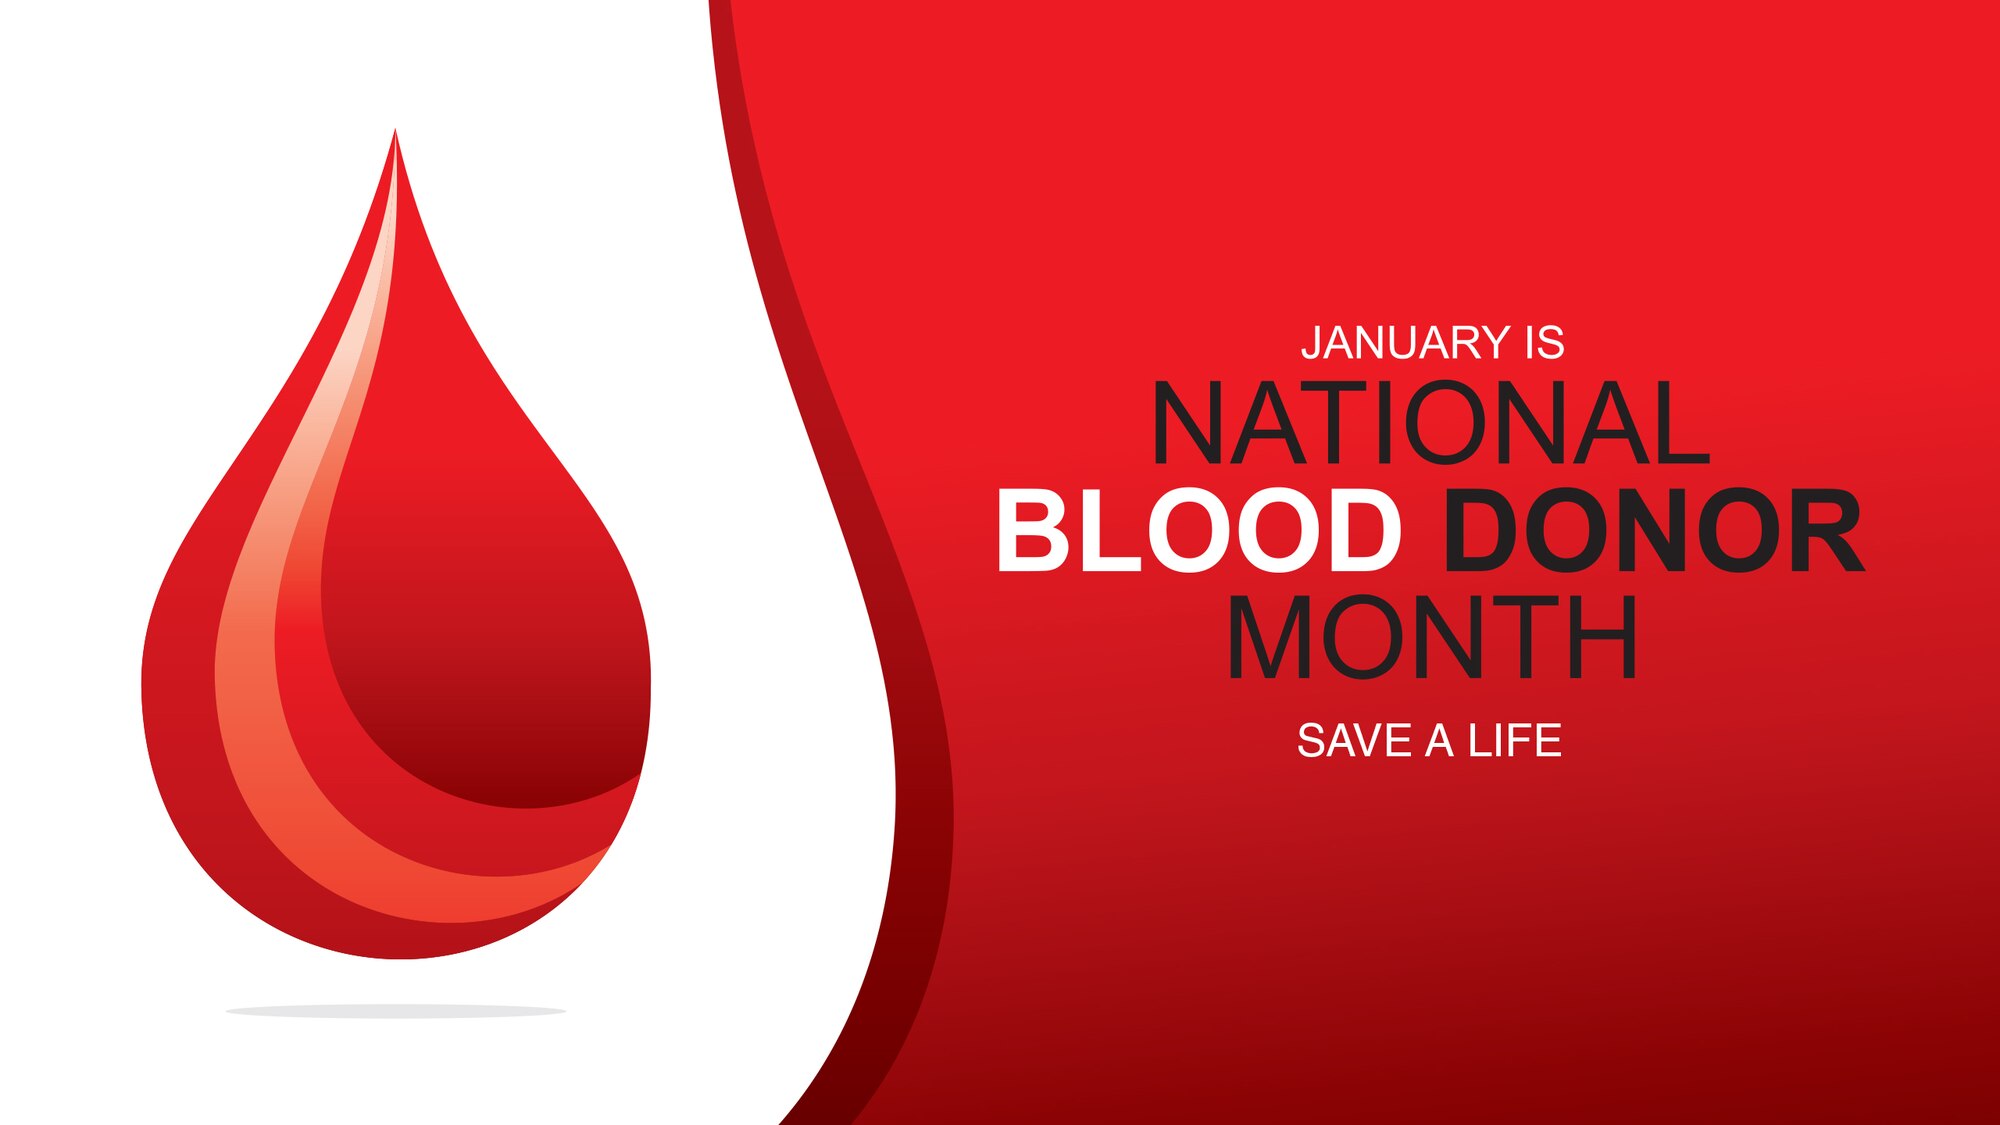 A graphic promoting January as National Blood Donor Month.